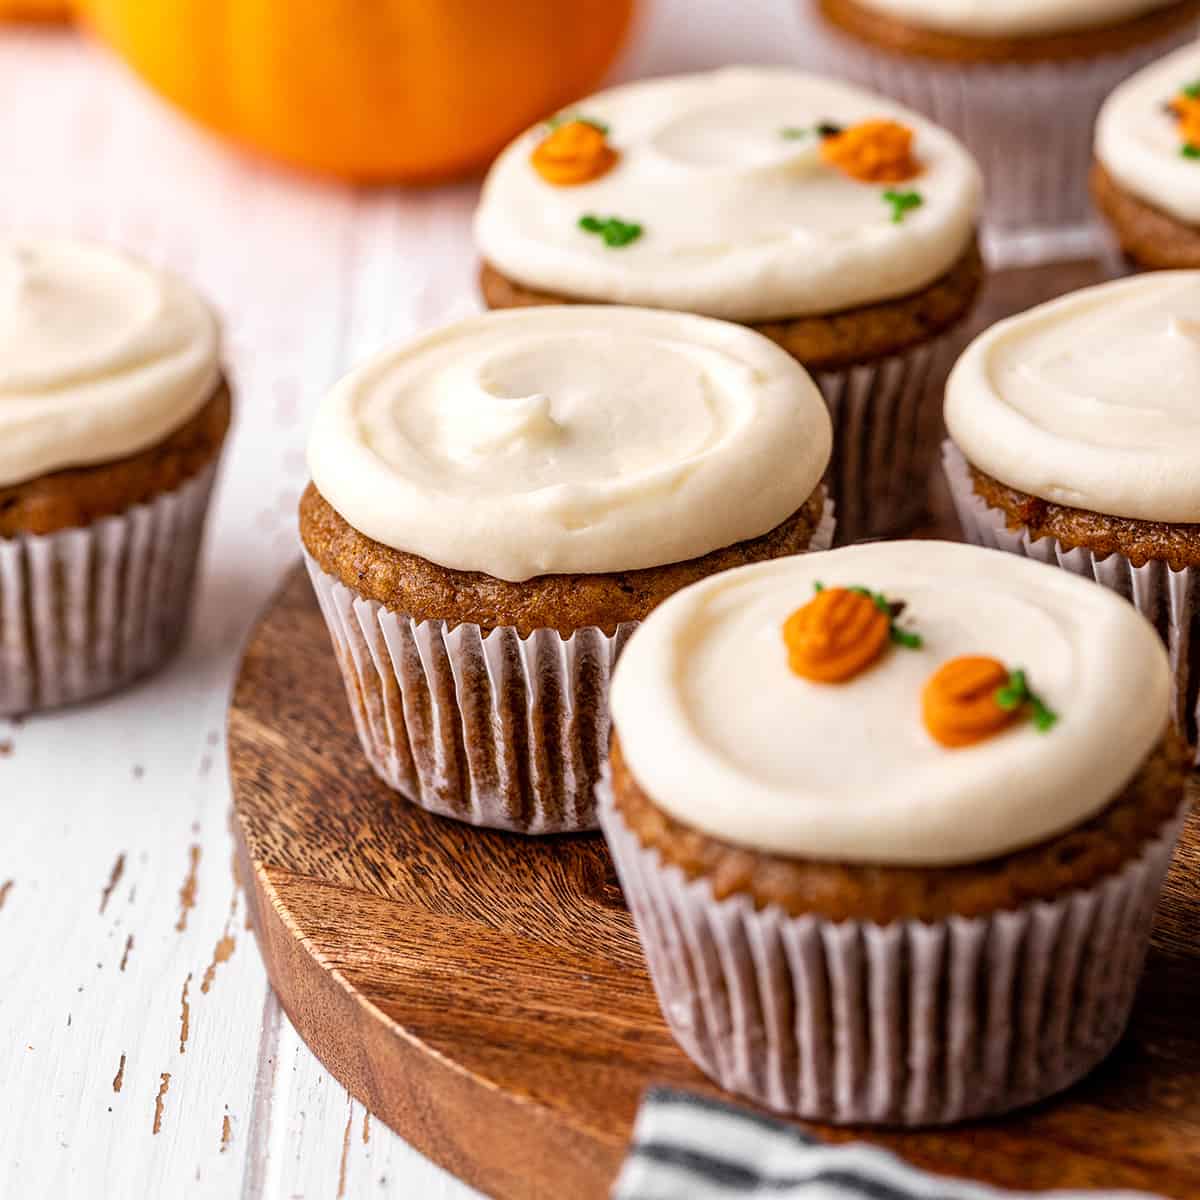 6 Pumpkin Cupcakes with cream cheese frosting on a wooden serving plate